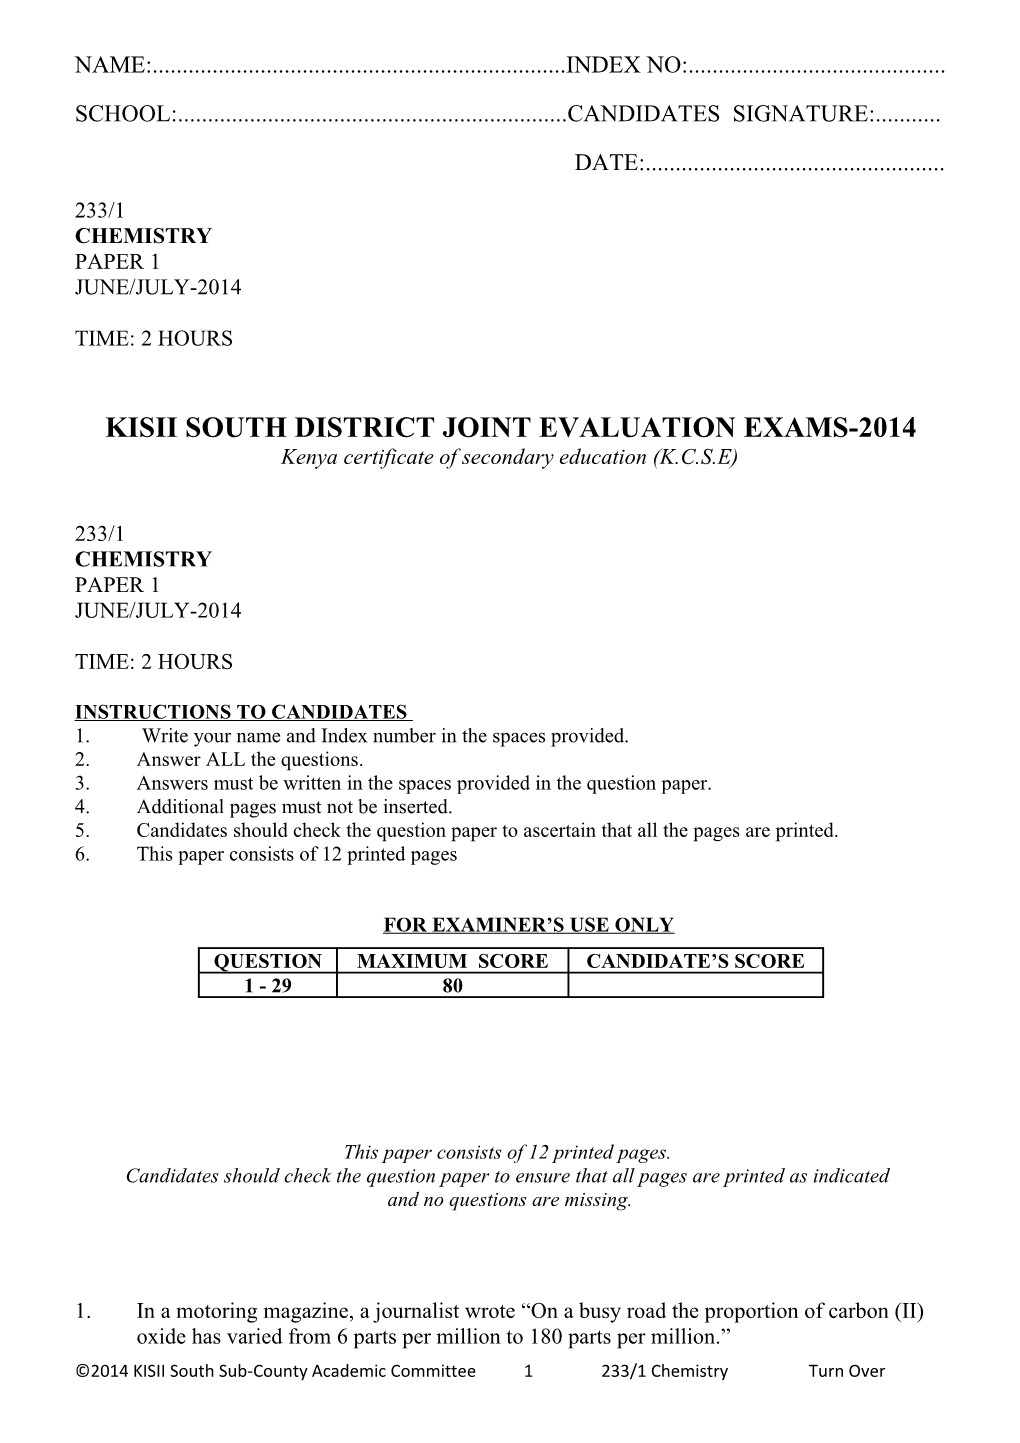 Kisii South District Joint Evaluation Exams-2014